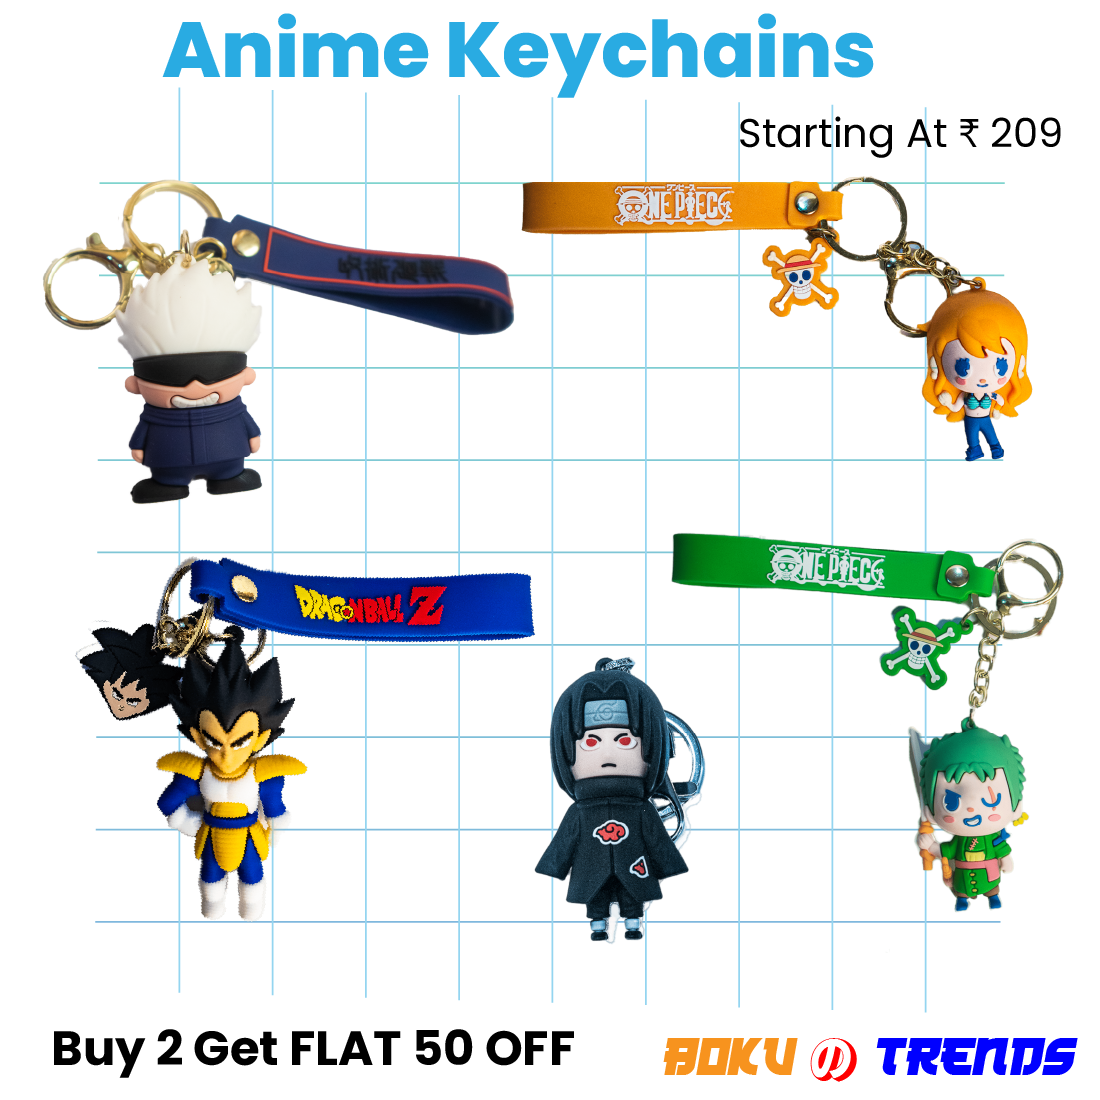 Wnt Anime Keychains 3D Motion Novelty Keychains Anime Figure Keychain for Women Men Kids Anime Gifts